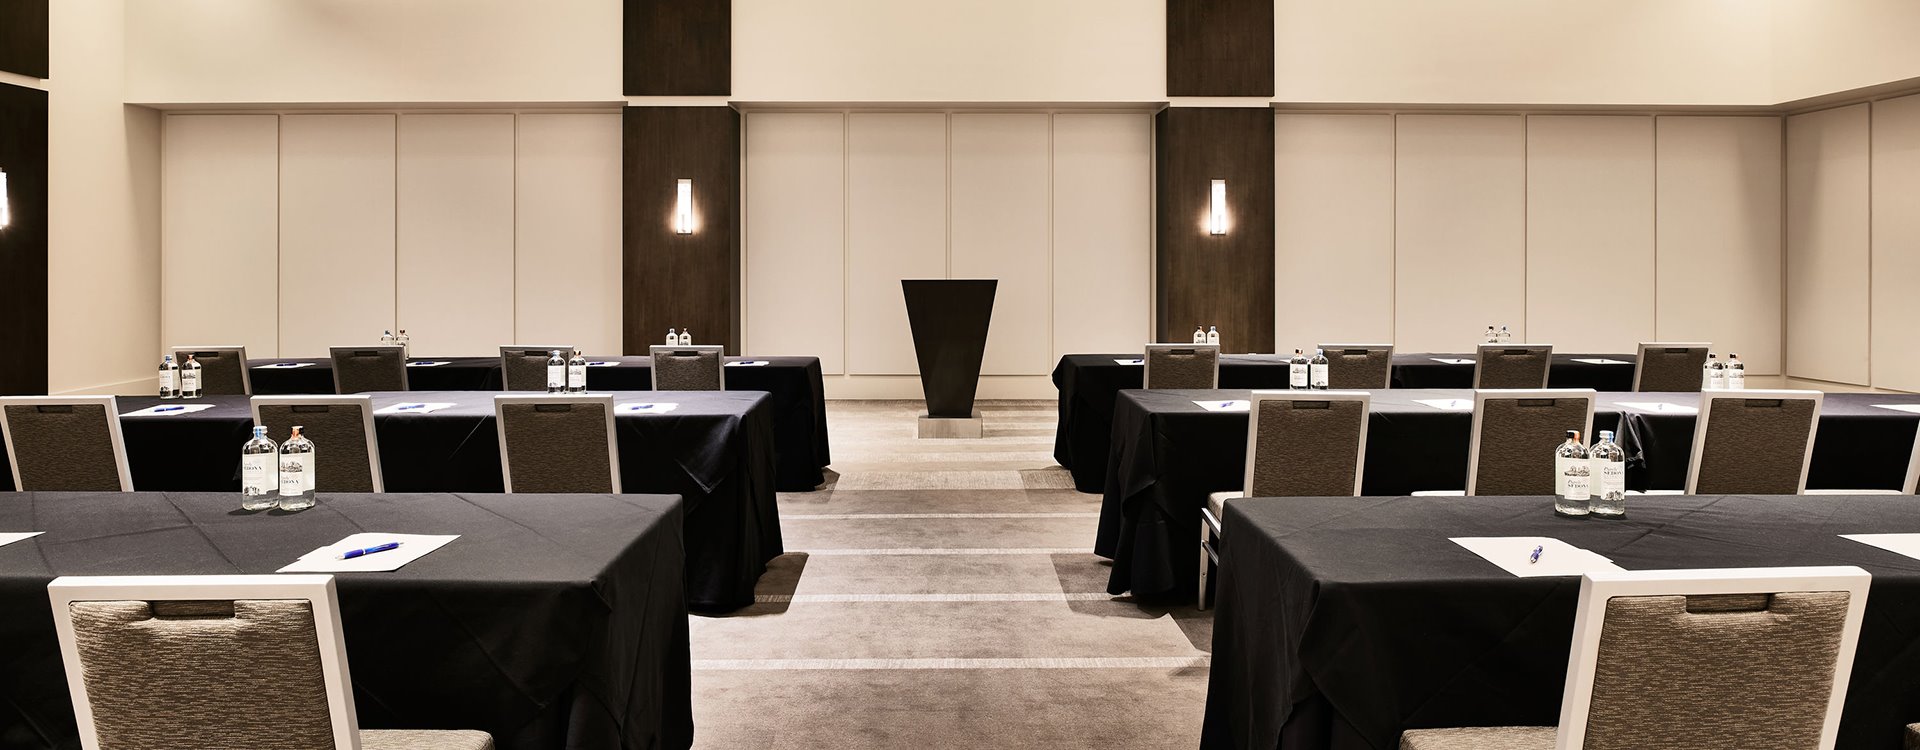 Meeting Services in Hotel Scottsdale